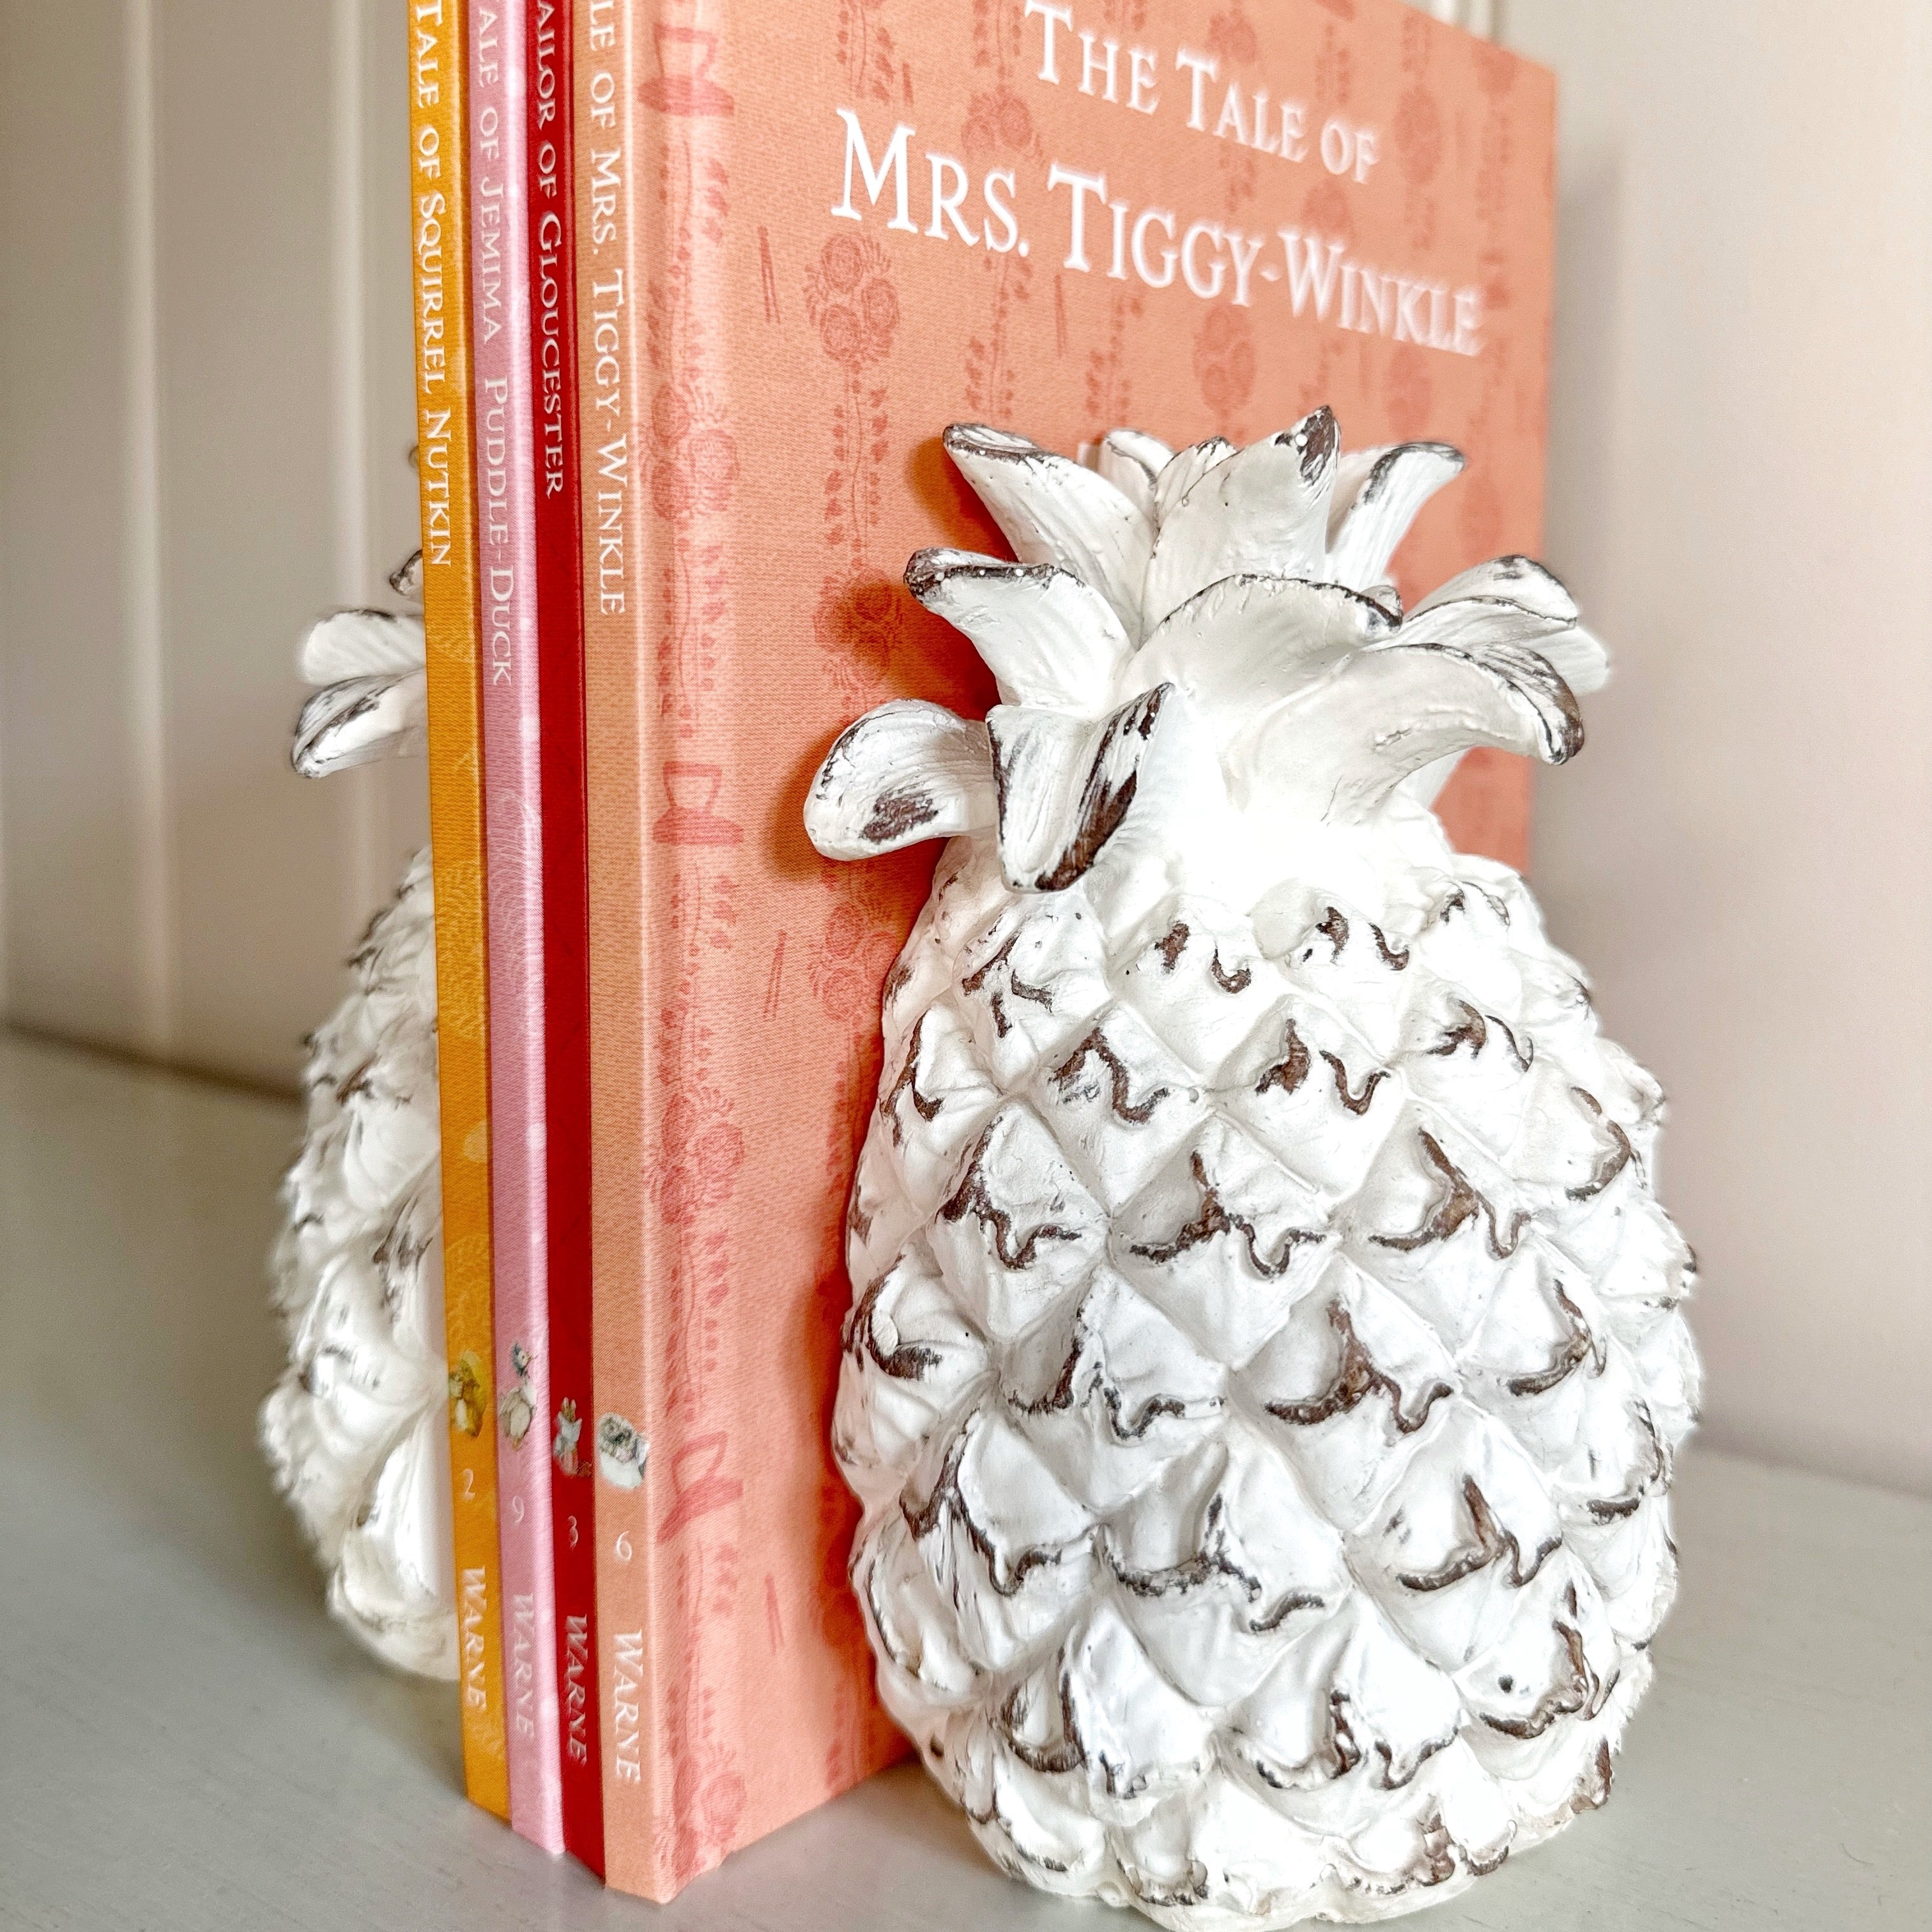 White Pineapple Bookends